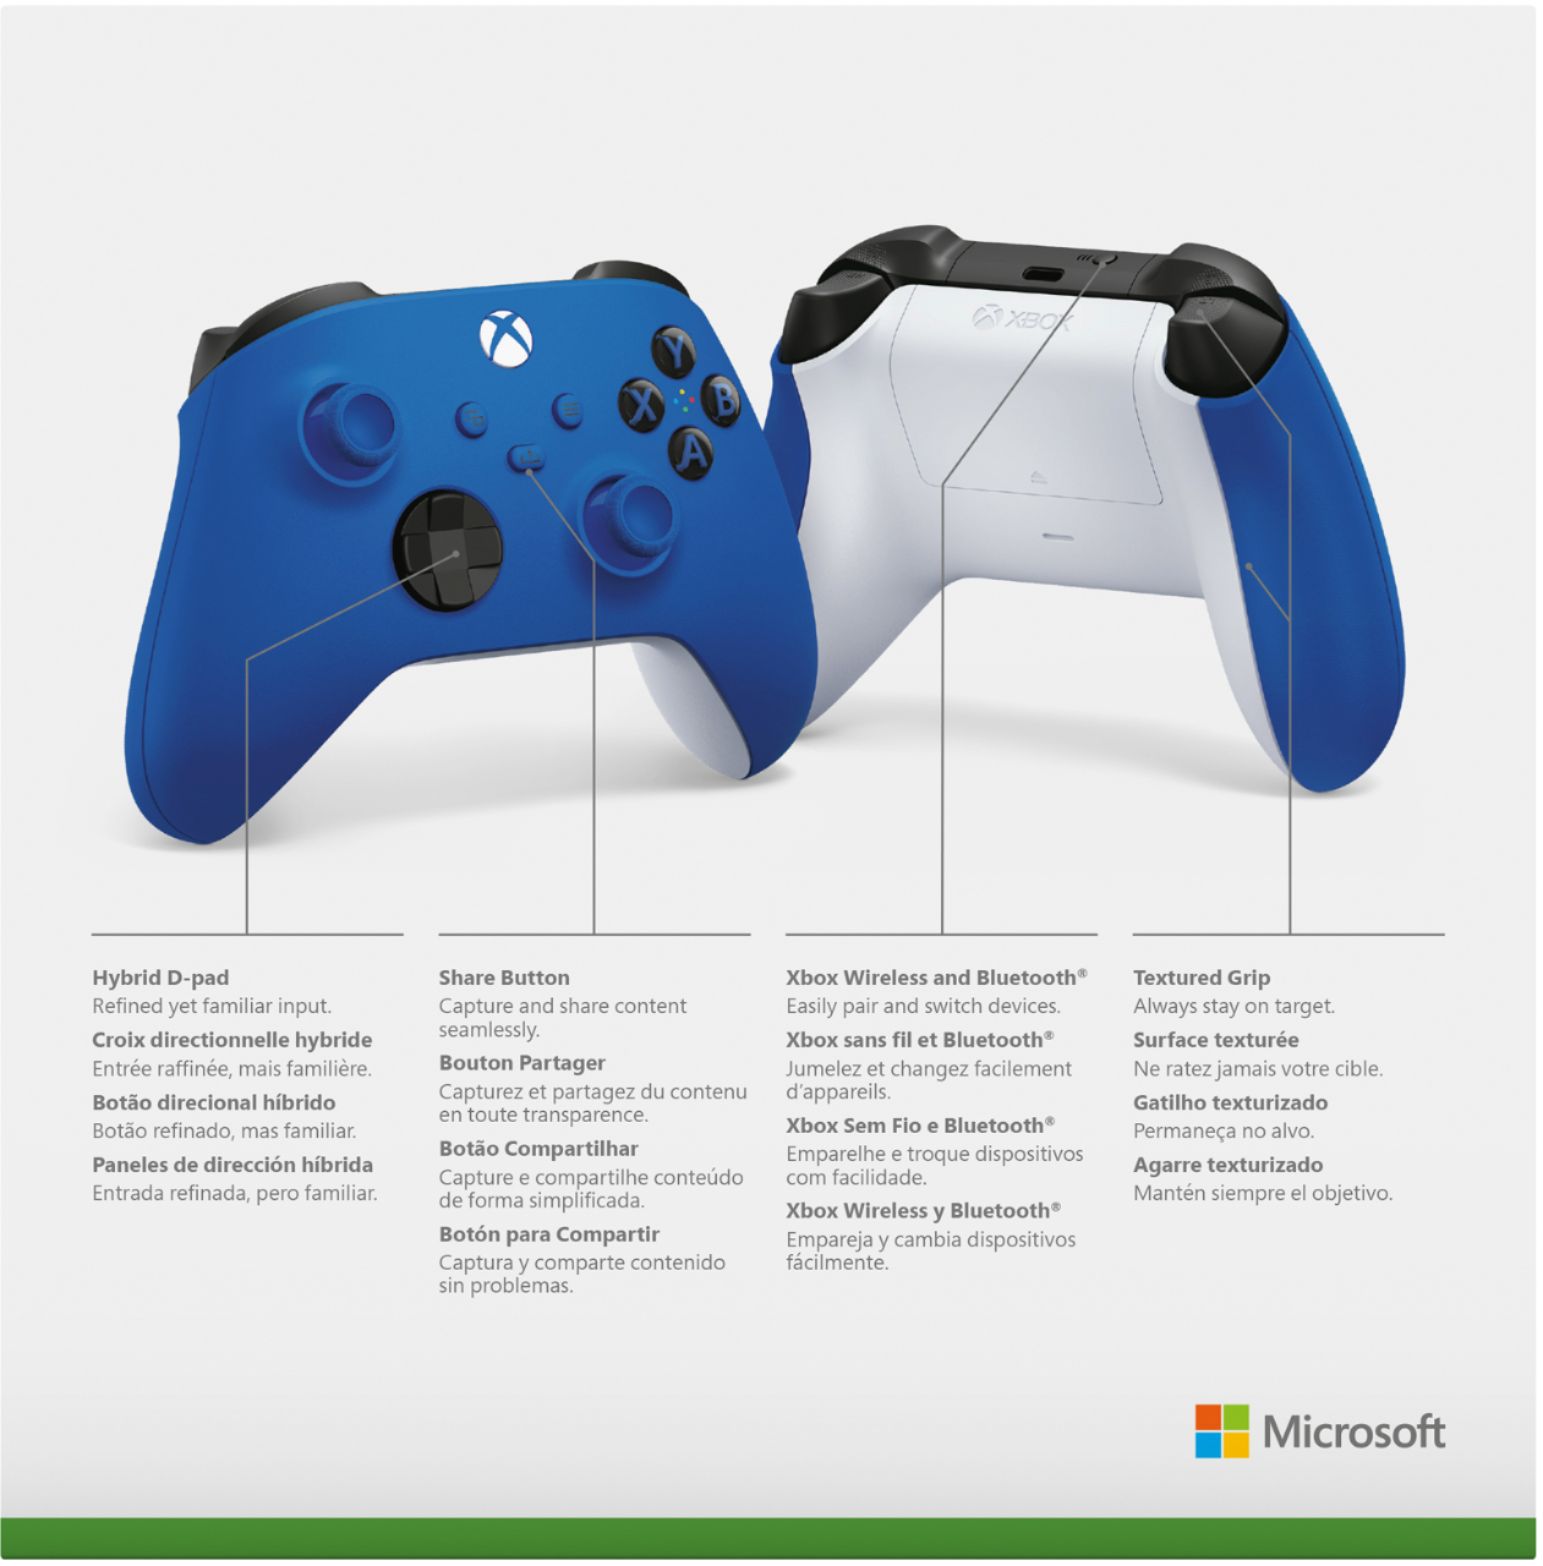 xbox one s wireless controller blue